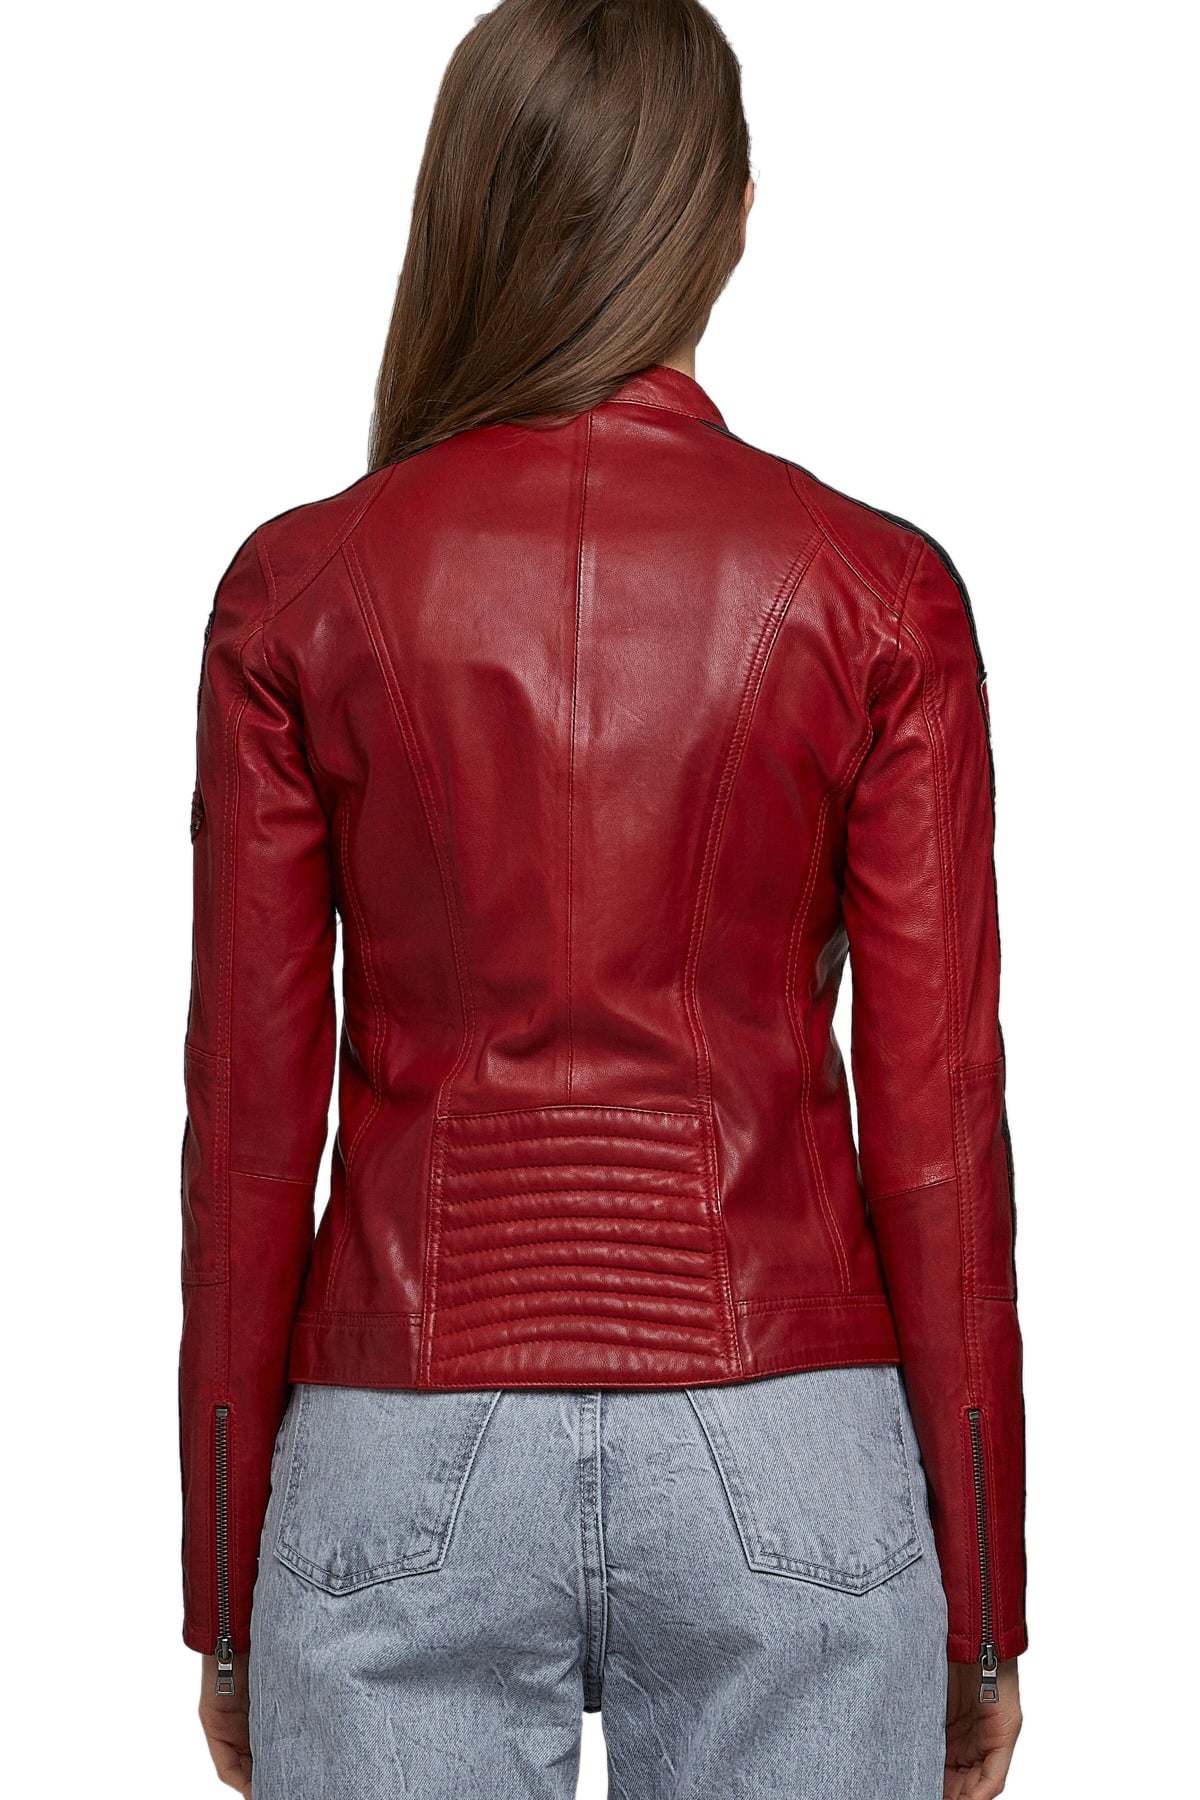 Dark Red Leather Jacket for Ladies in Portland